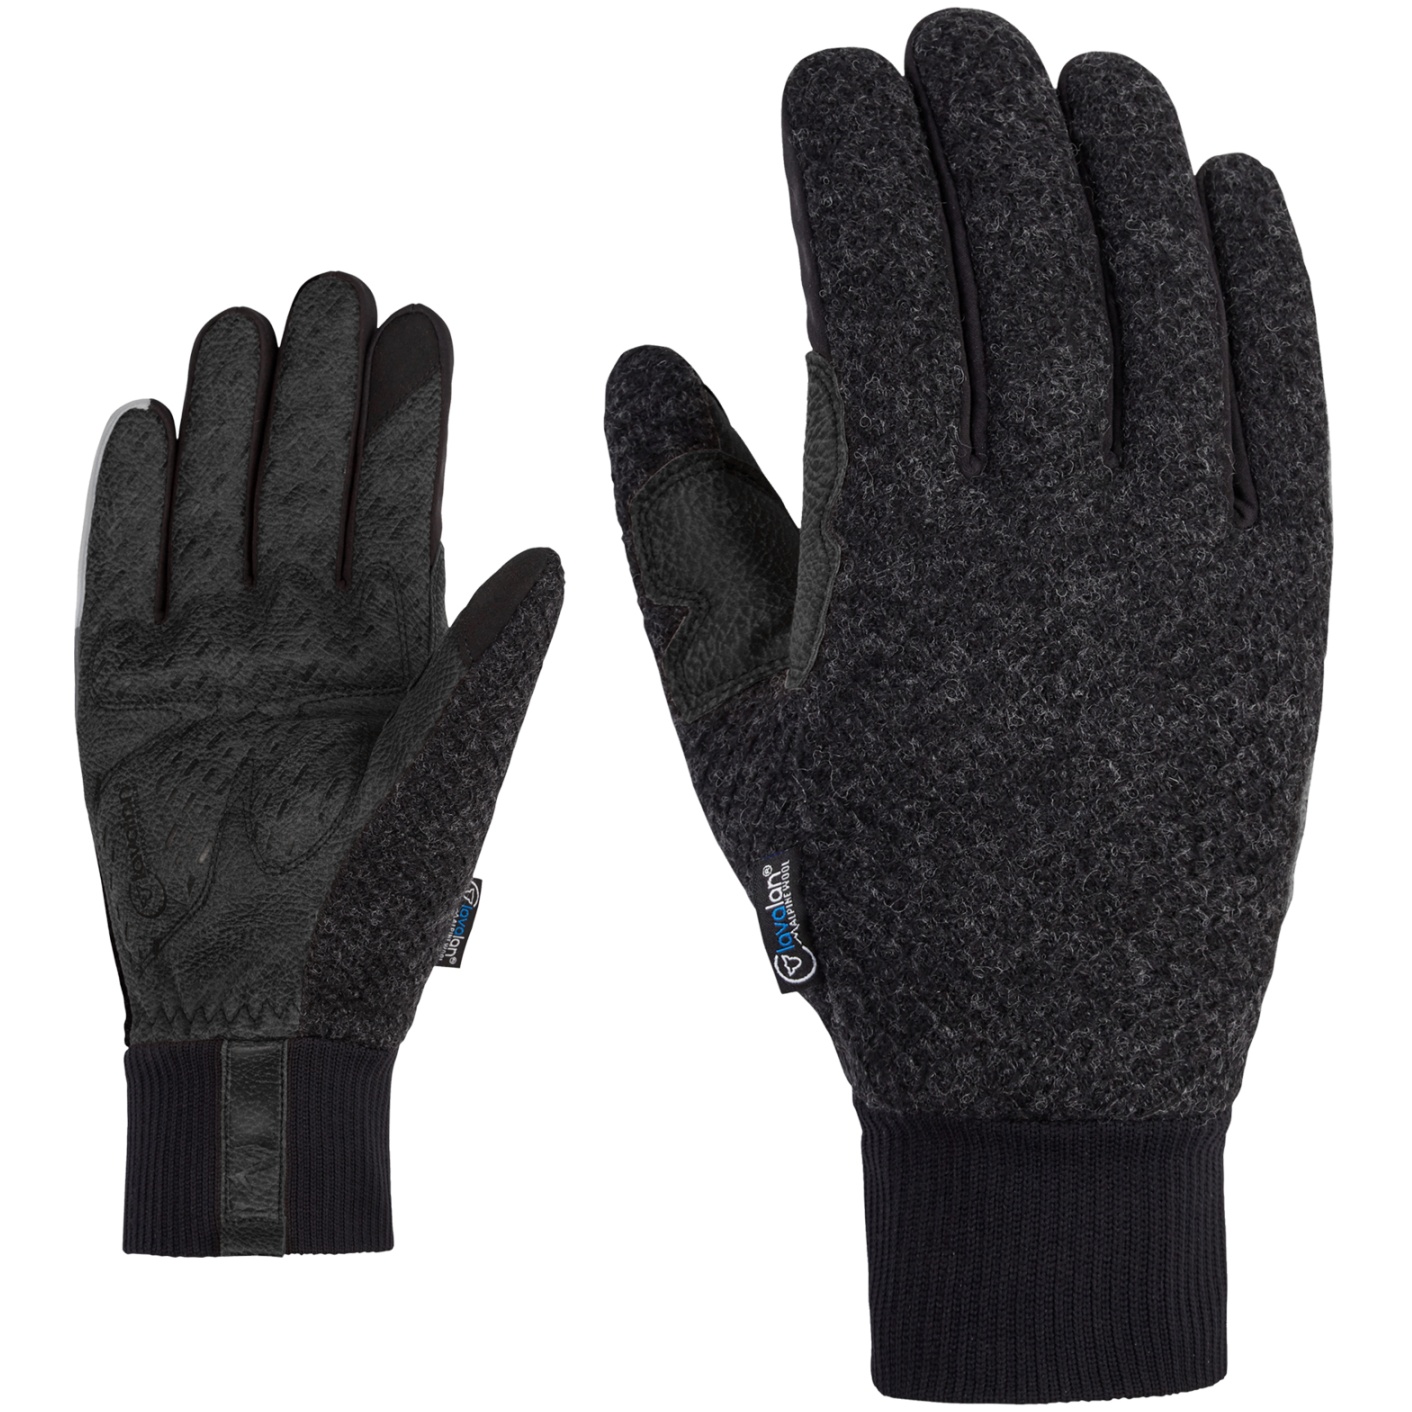 Picture of Ziener Dagh Aw Touch Bike Gloves - black